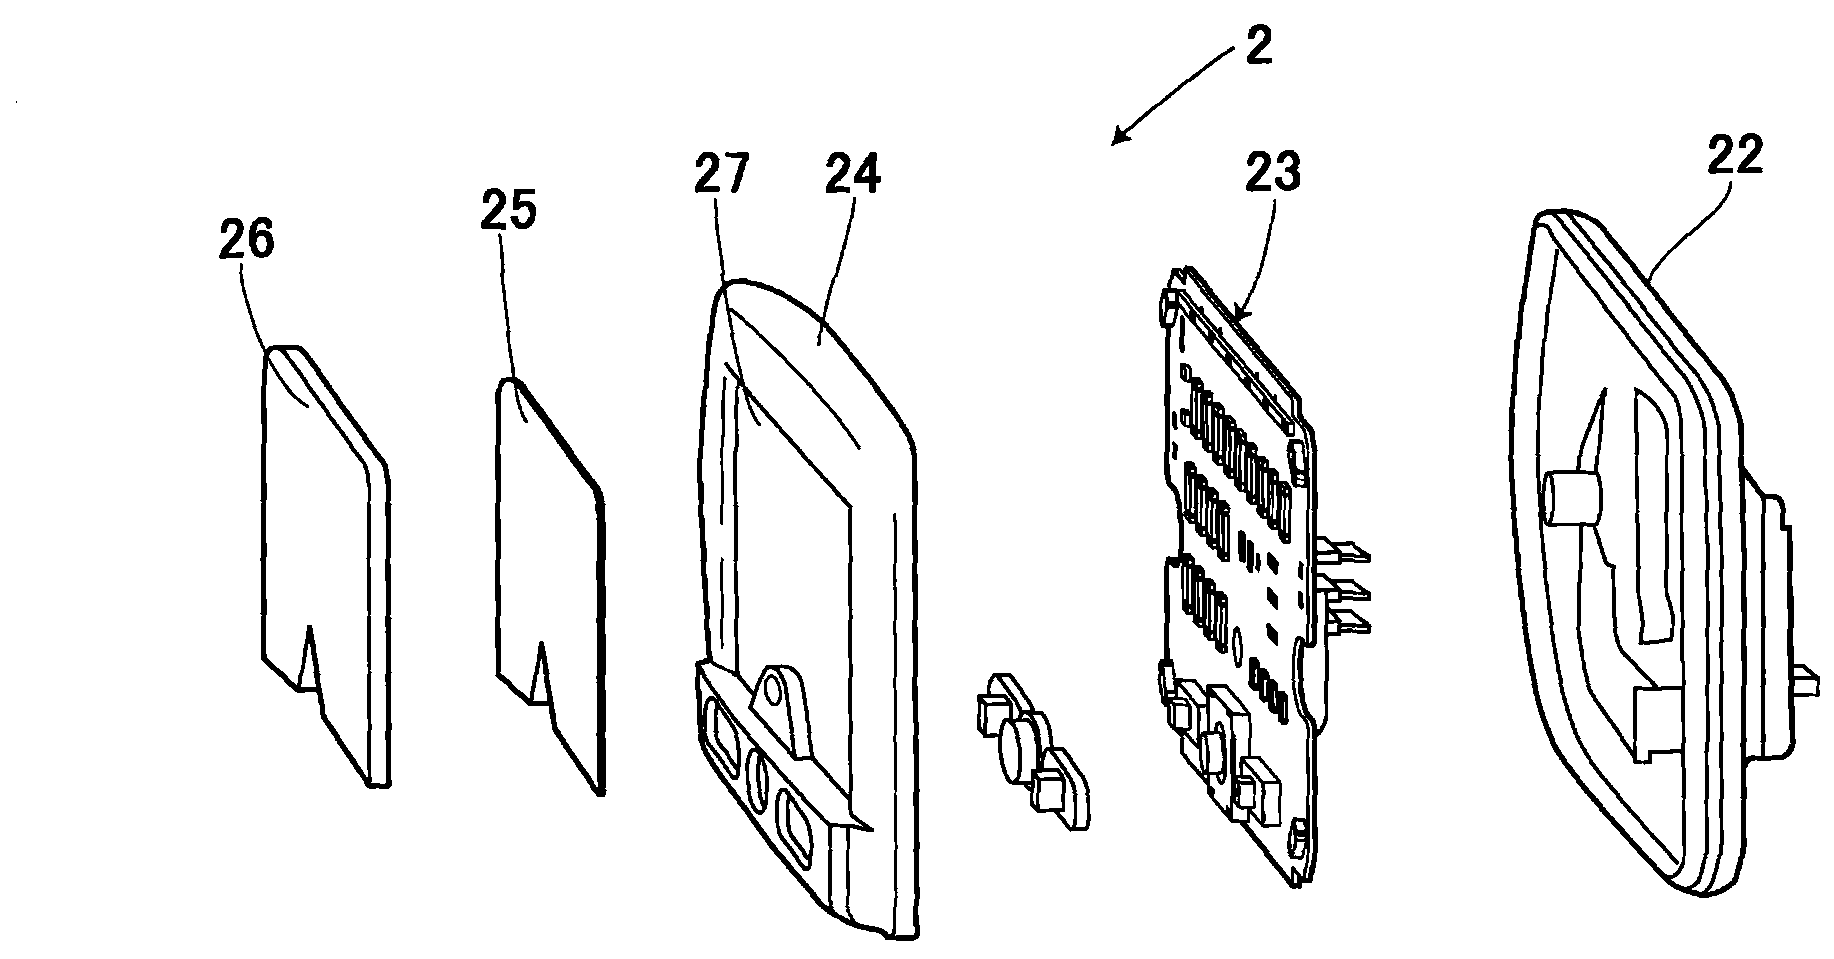 Lighting device in automobile compartment